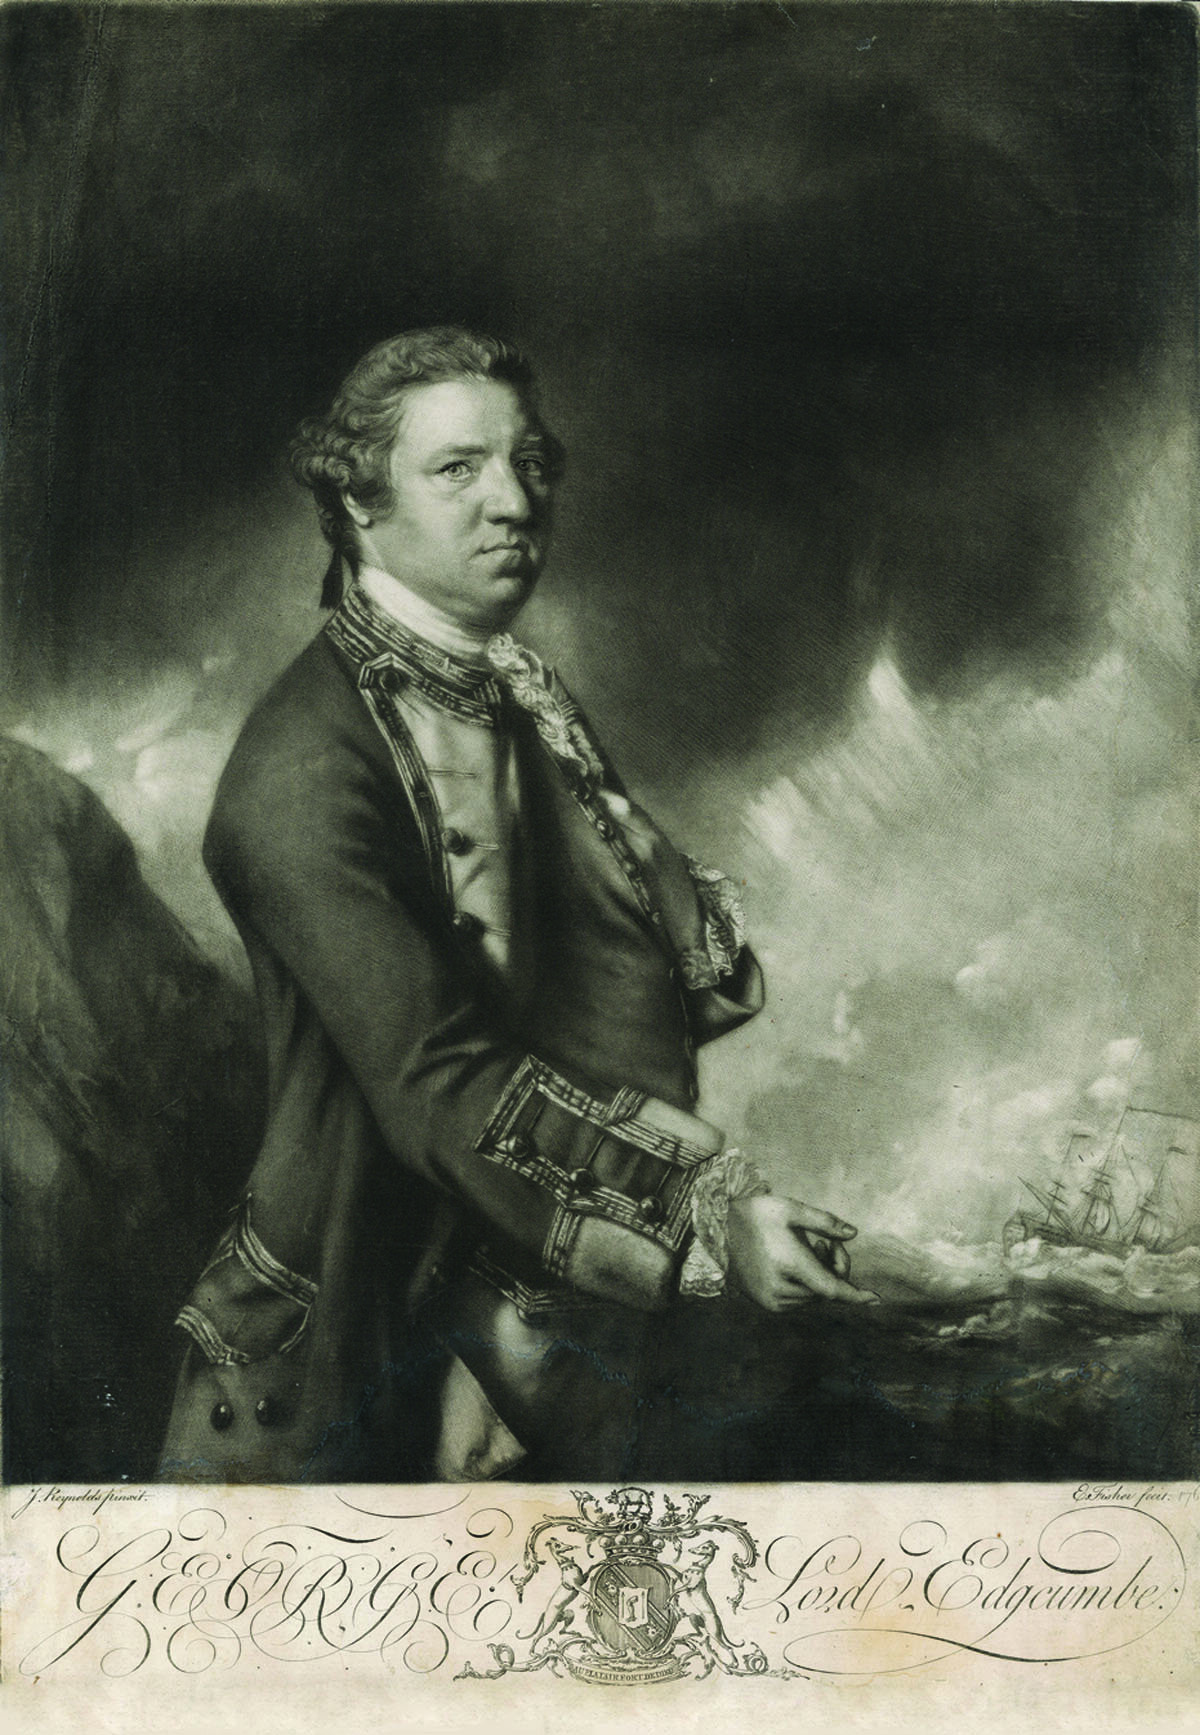   Edward Fisher (1722-1781)  after Sir Joshua Reynolds (1723-1792)   George, Lord Edgcumbe&nbsp;   Mezzotint, 1761 The Noble Maritime Collection  Gift of Barnett Shepherd  